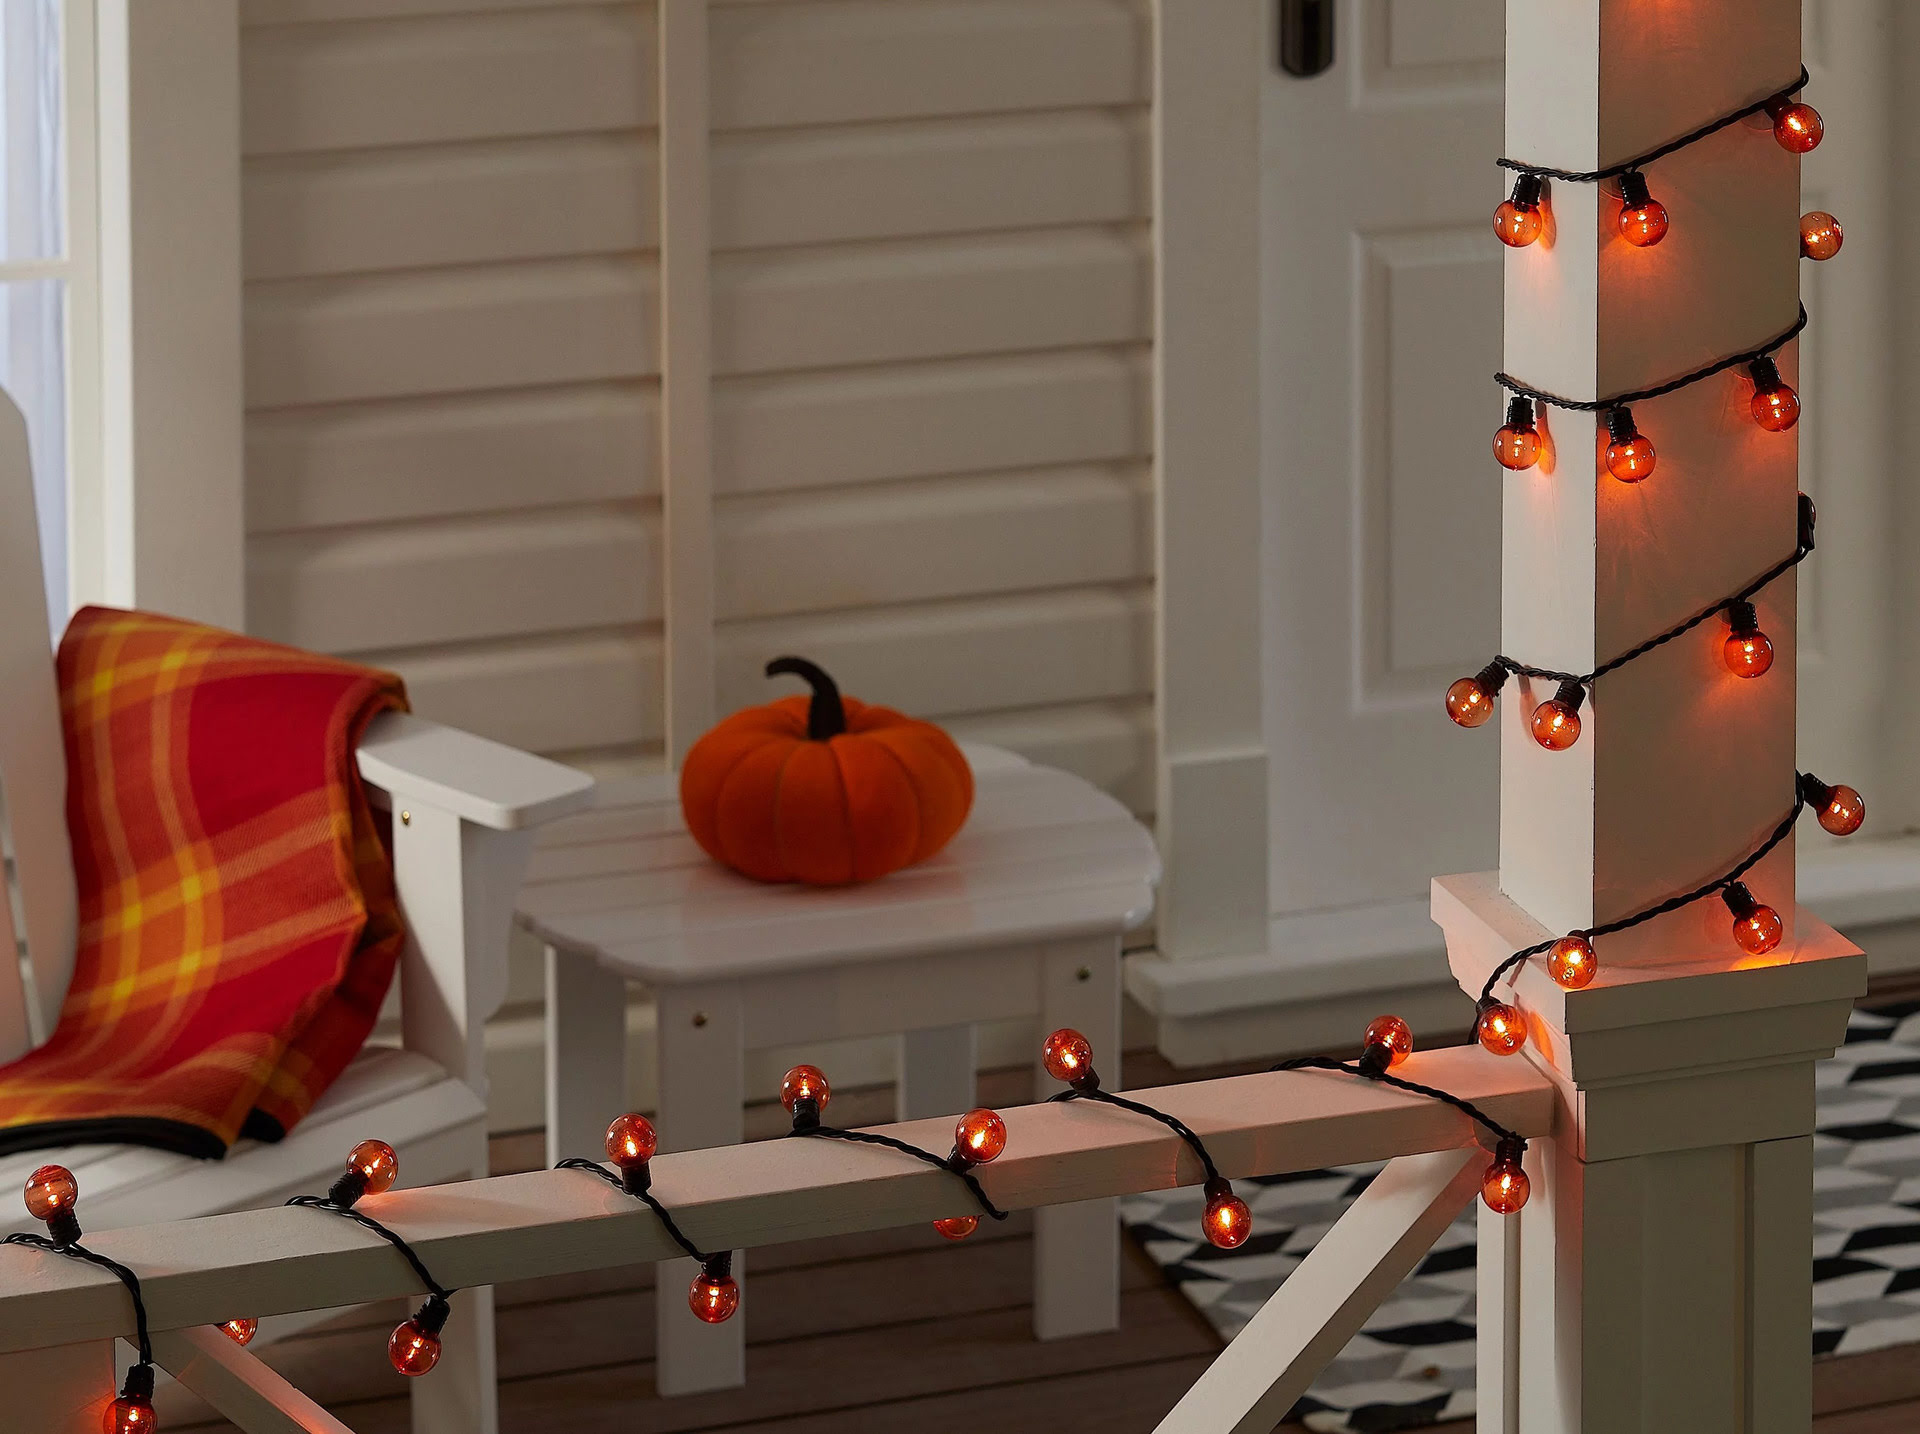 How To Put Christmas Lights On Porch Railing